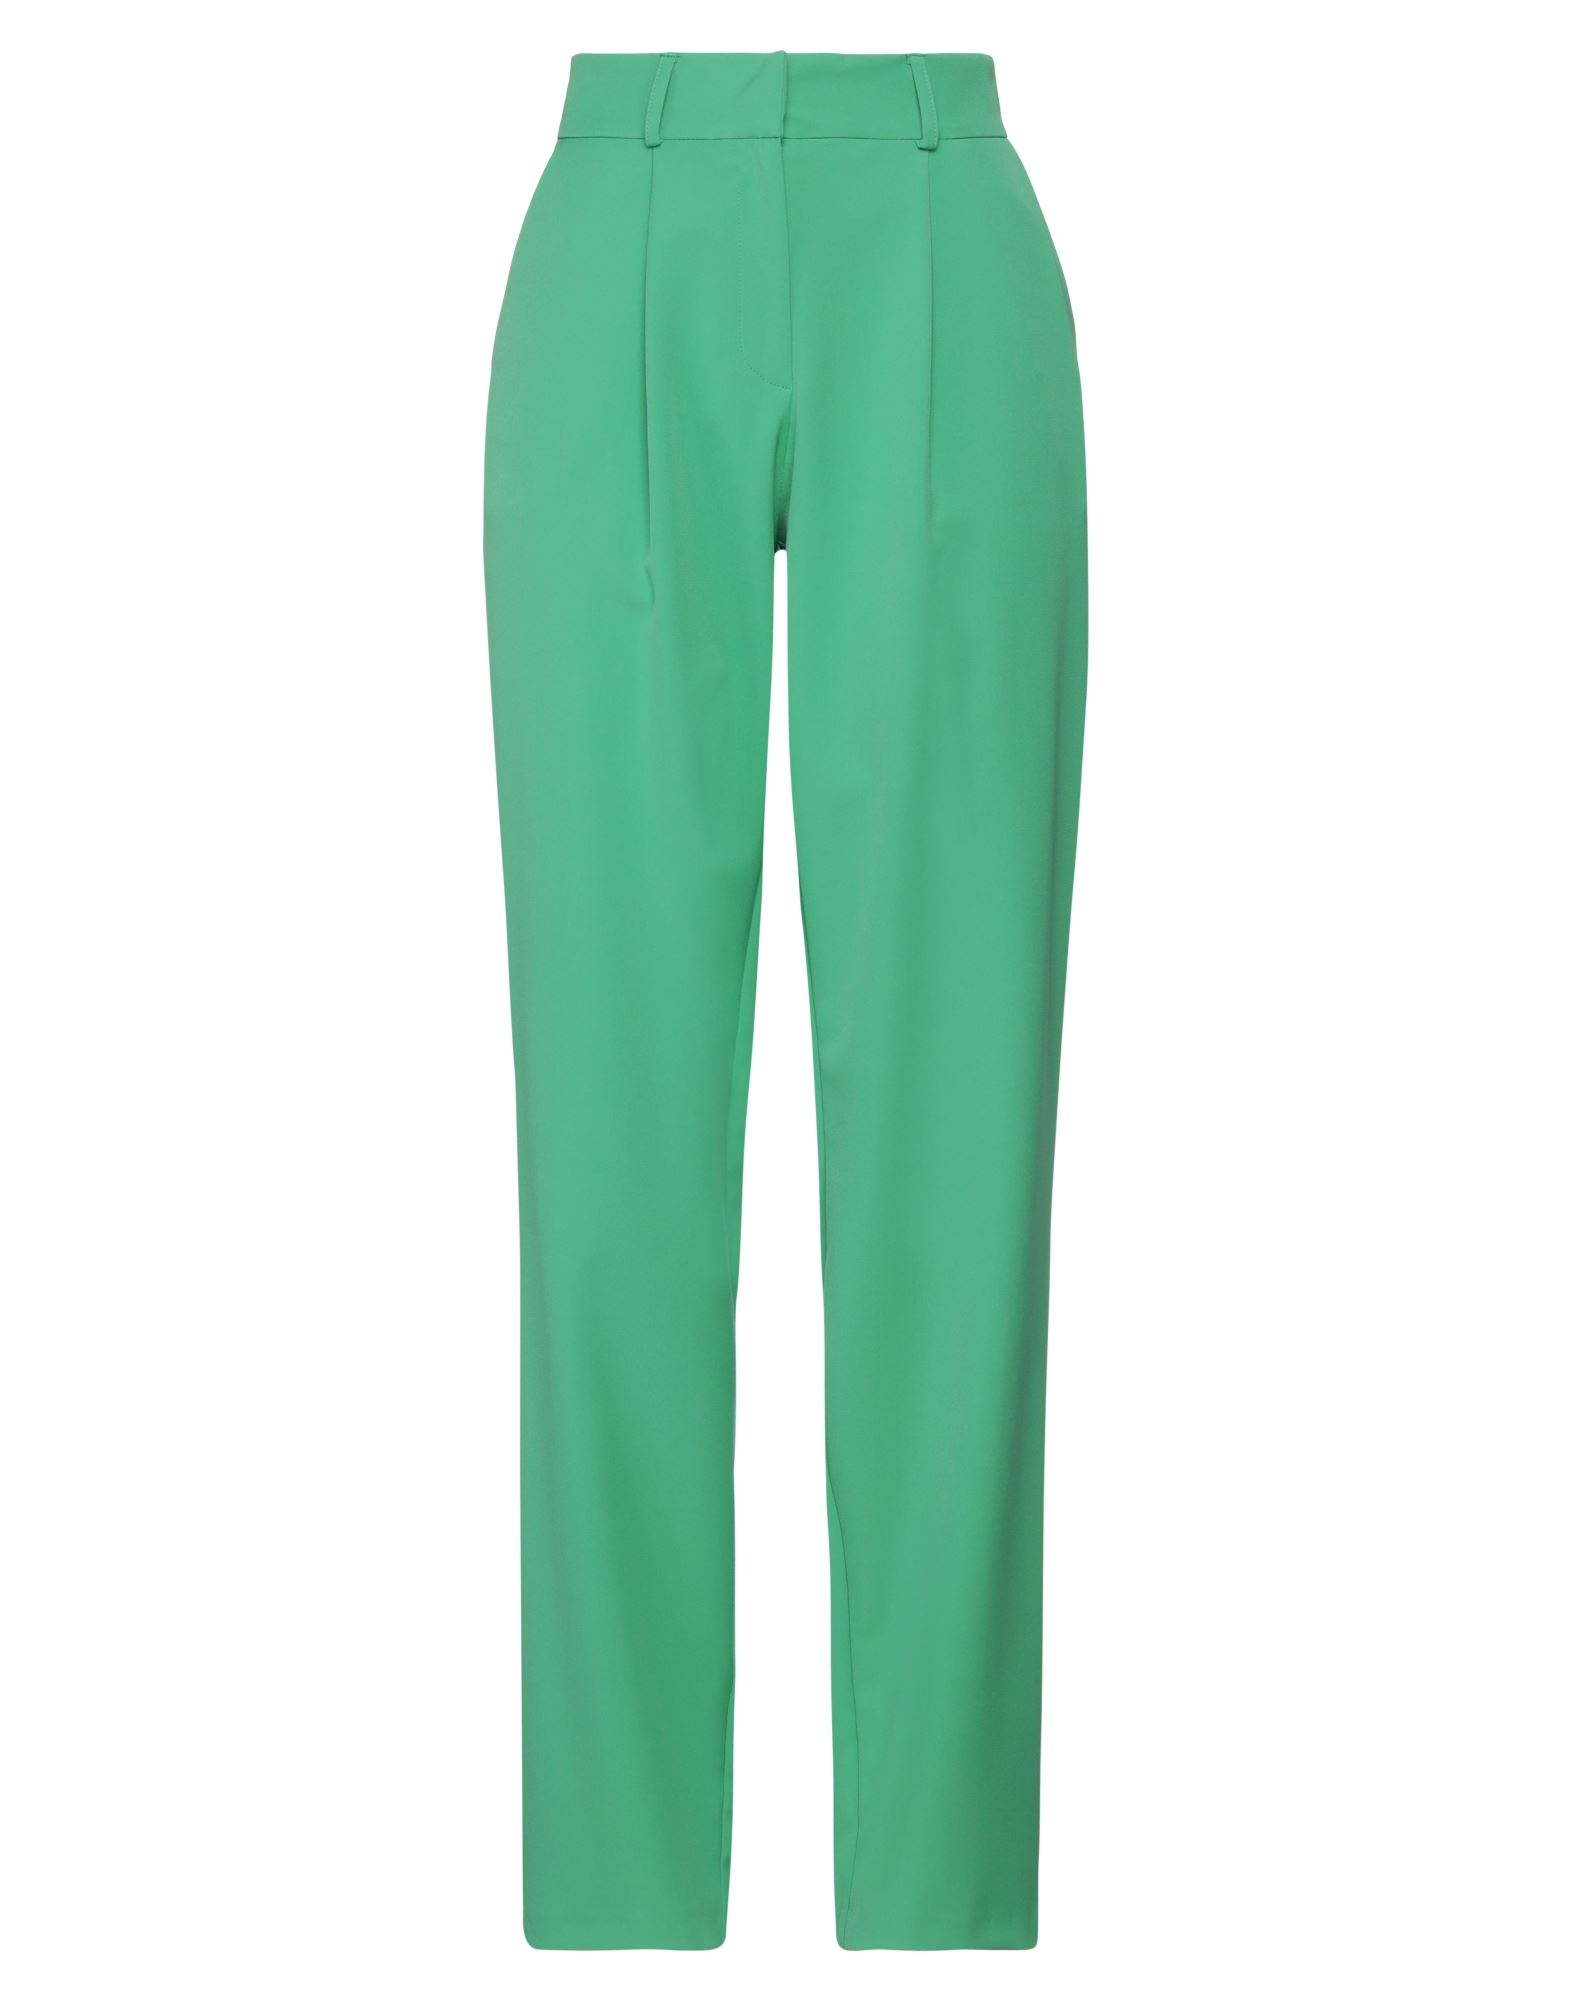 Actualee Pants In Green